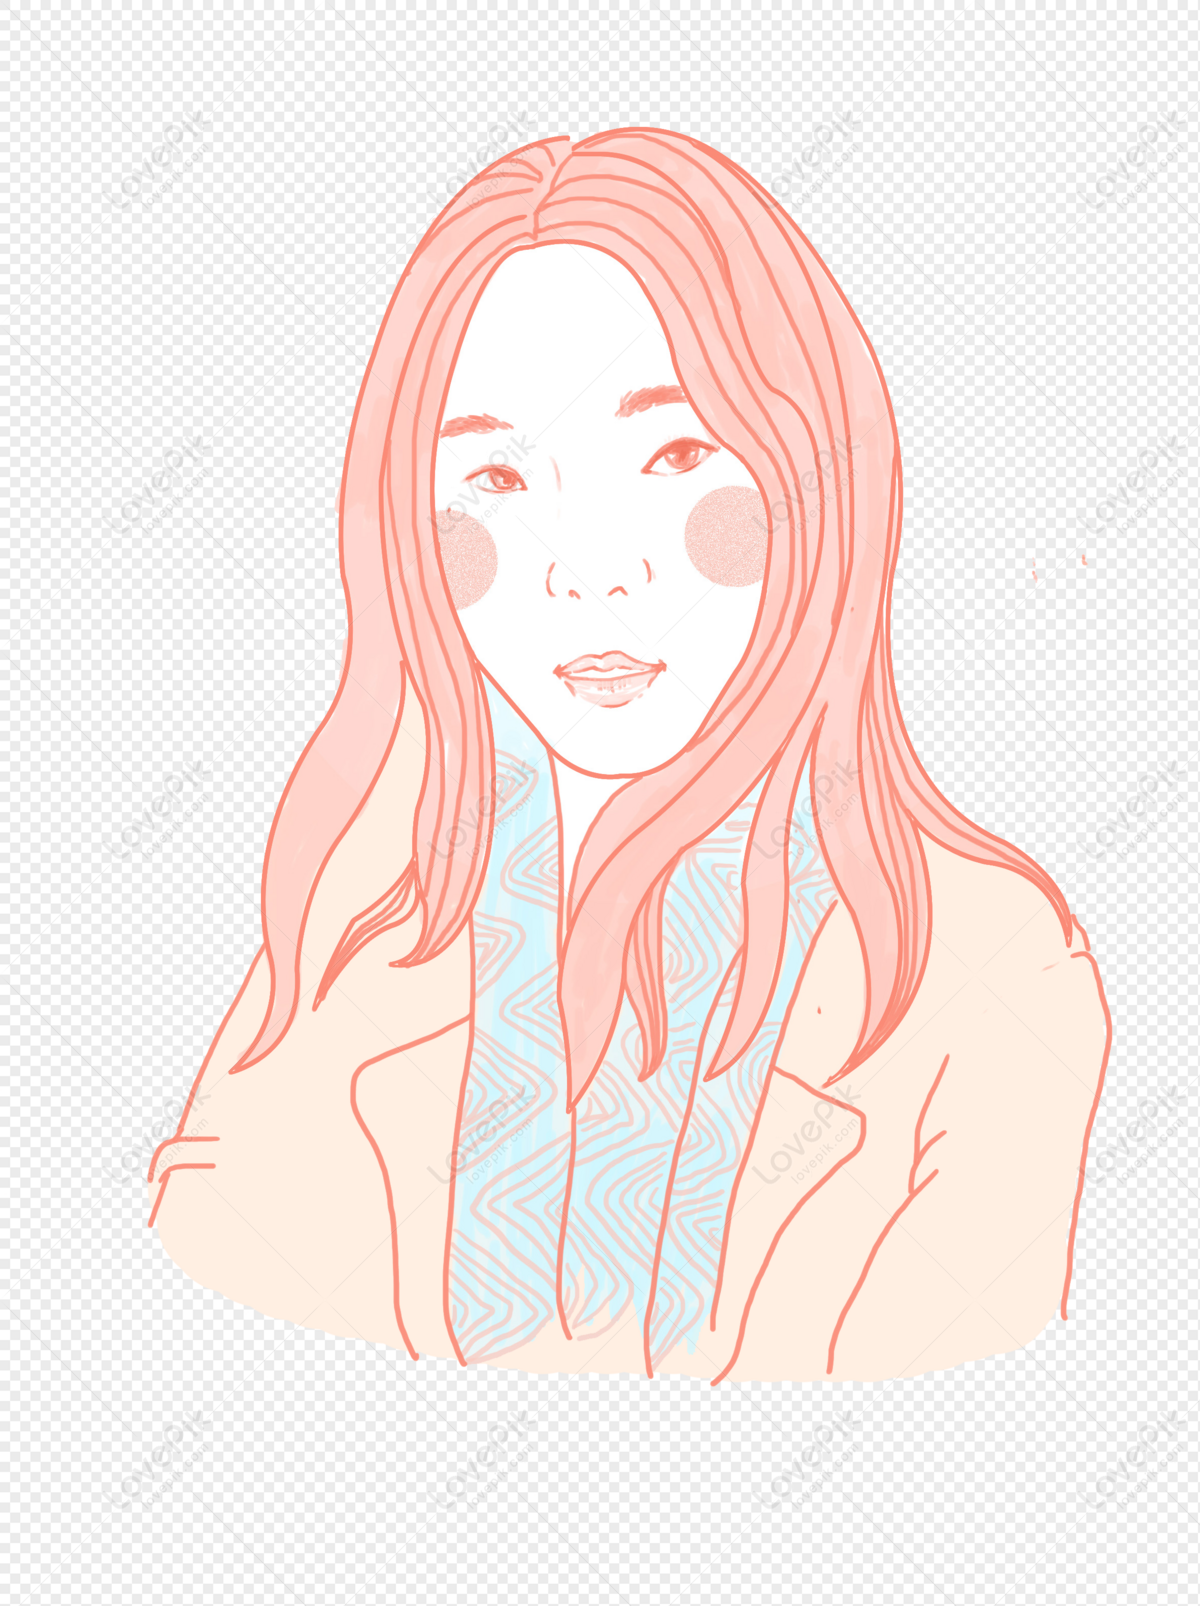 Girl Hand Drawing PNG Image Free Download And Clipart Image For Free  Download - Lovepik | 401365451